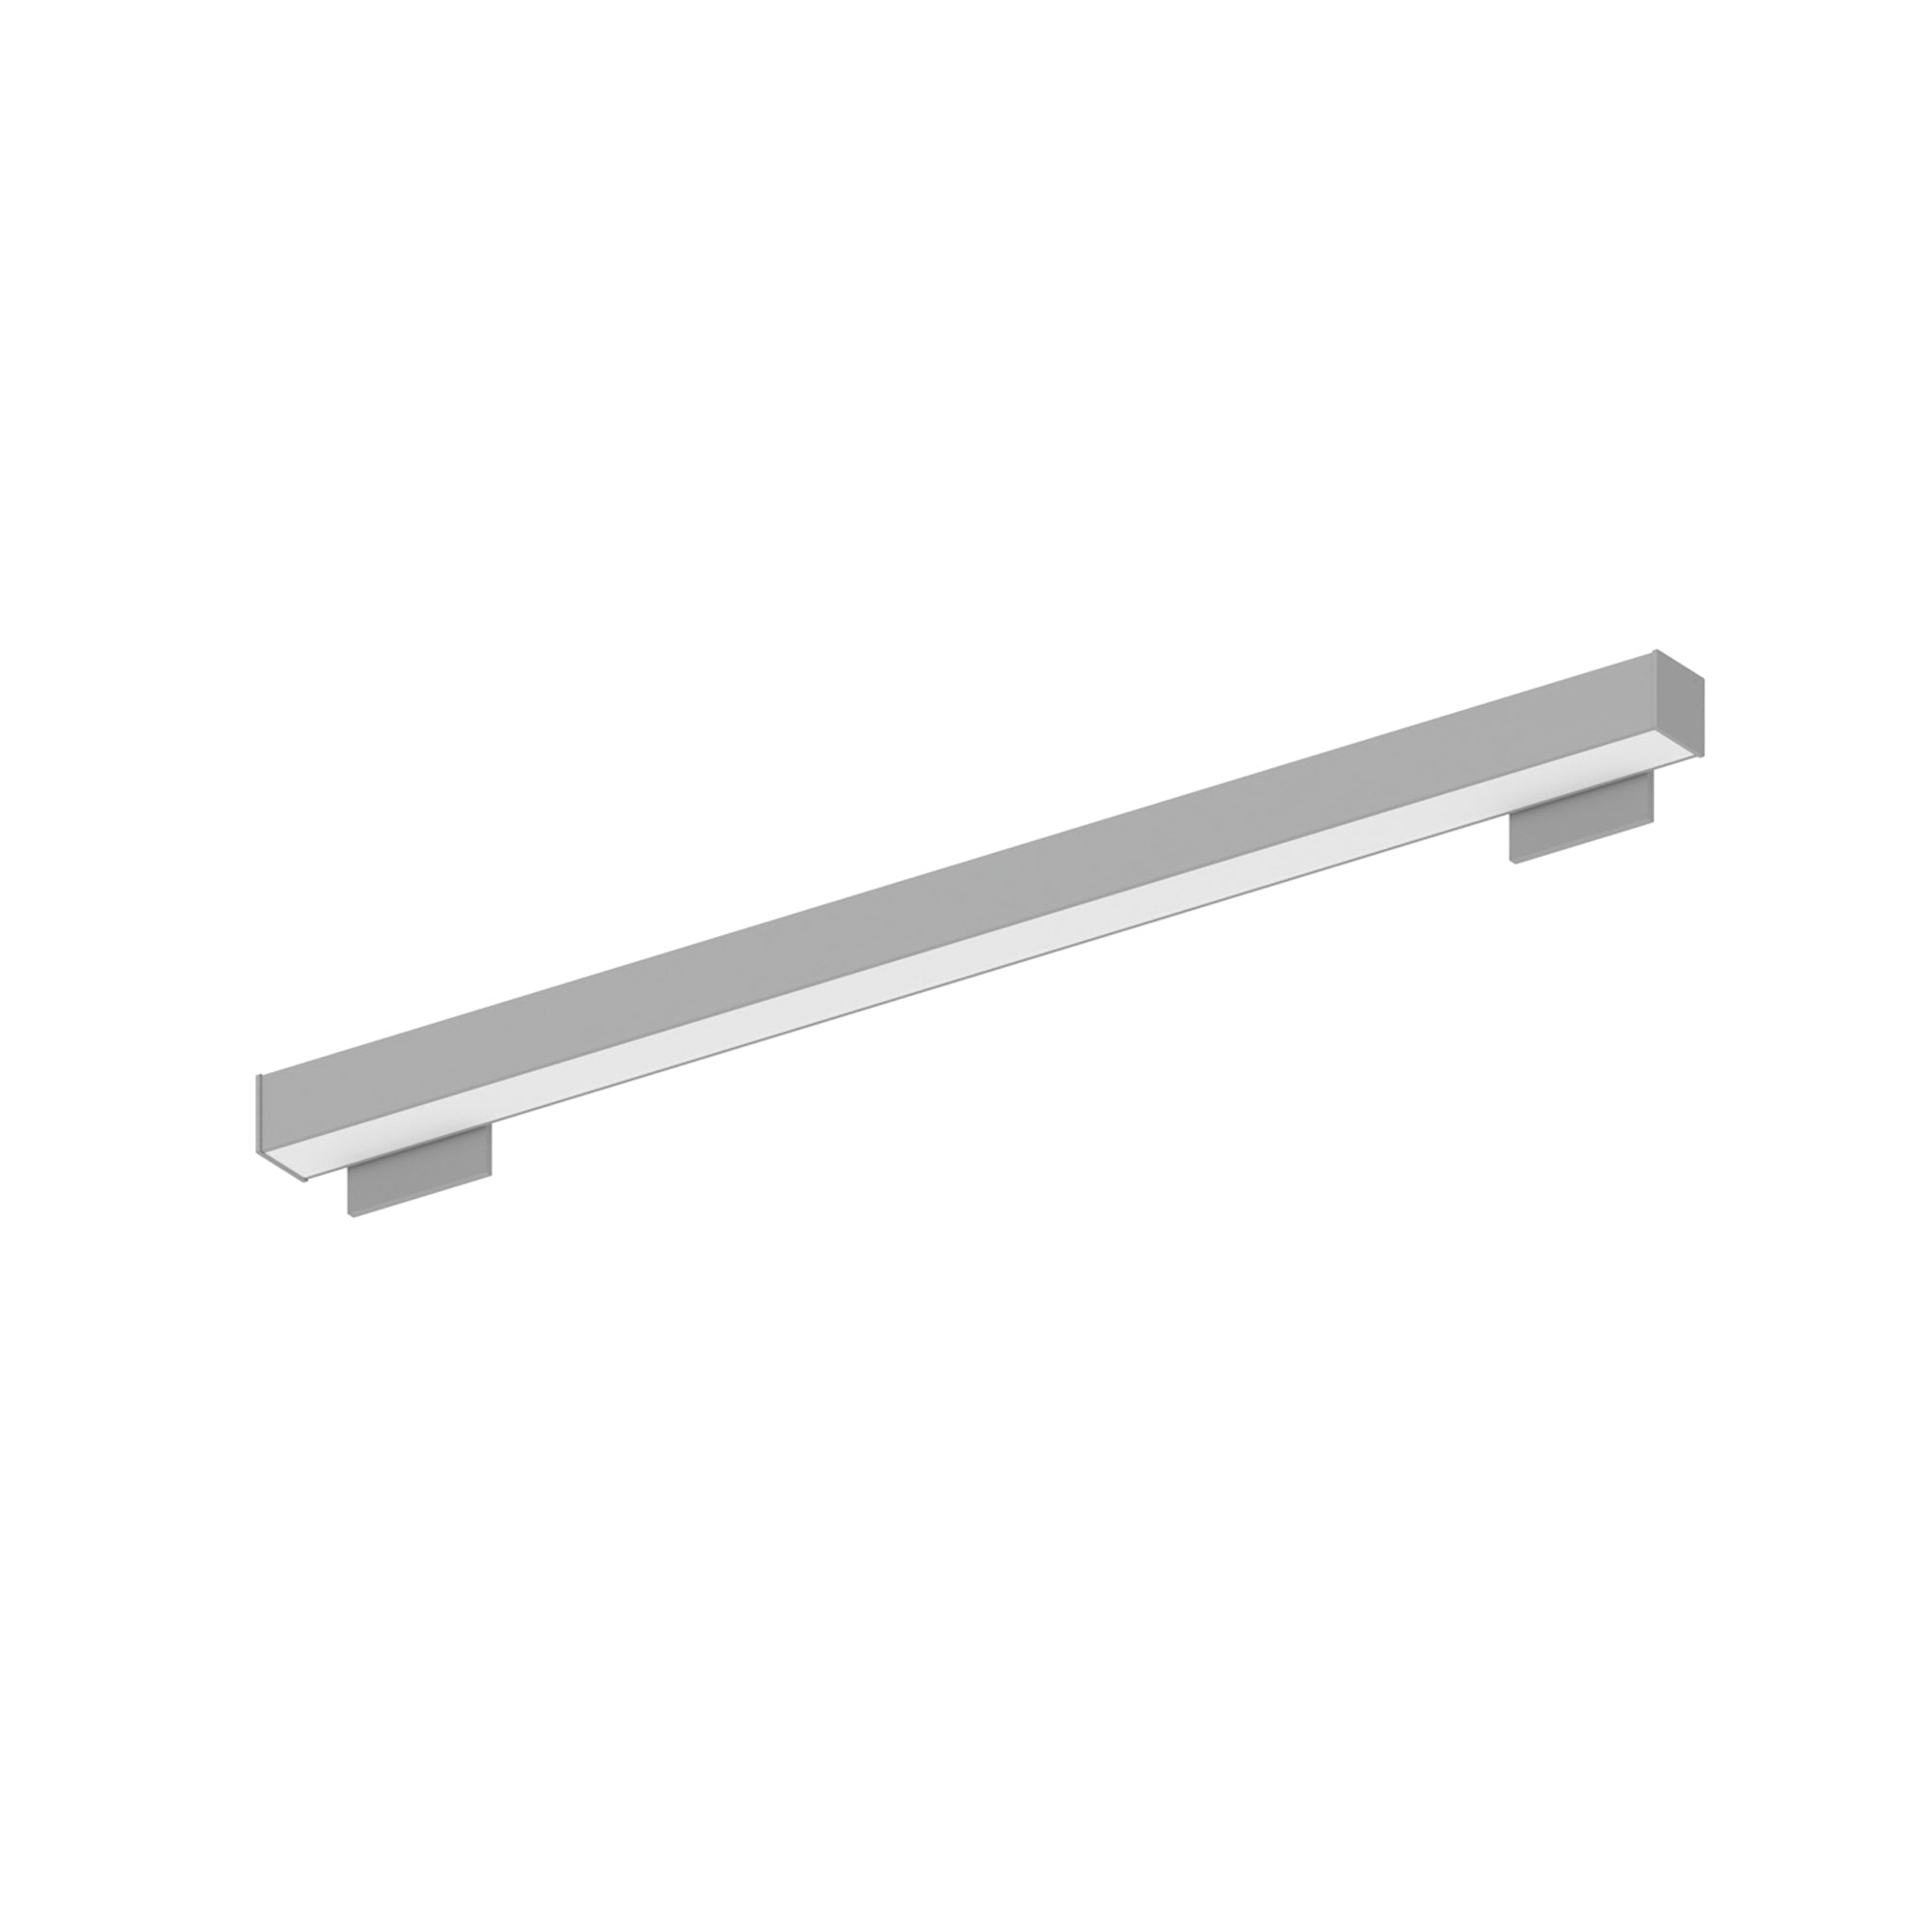 Nora Lighting NWLIN-41040A/L4-R4 - Linear - 4' L-Line LED Wall Mount Linear, 4200lm / 4000K, 4 Inchx4 Inch Left Plate & 4 Inchx4 Inch Right Plate, Aluminum Finish